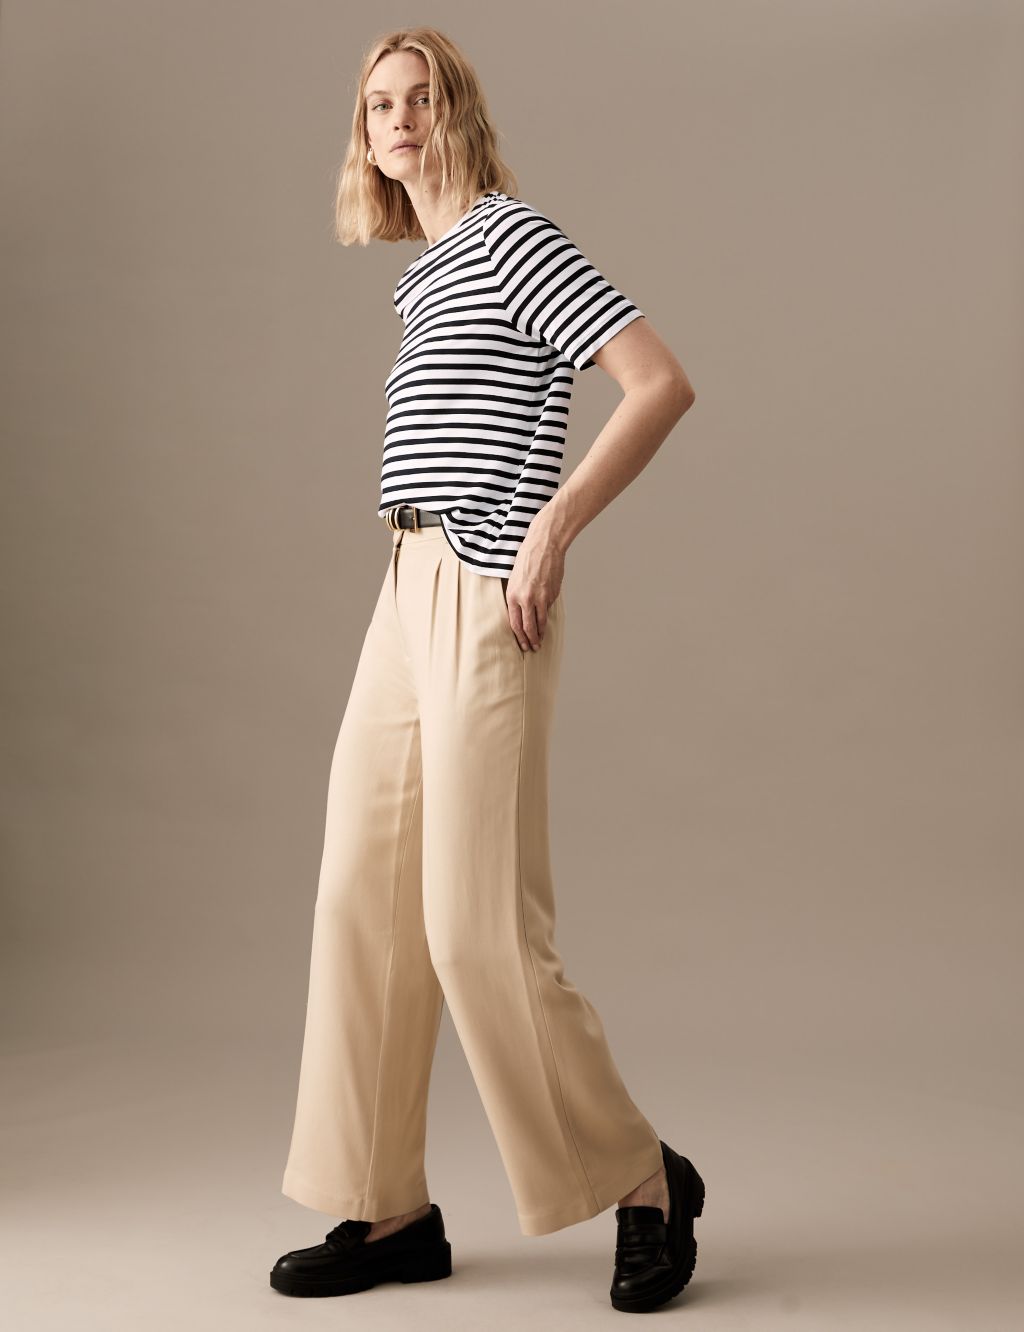 Jersey Striped Round Neck Relaxed T-Shirt image 2